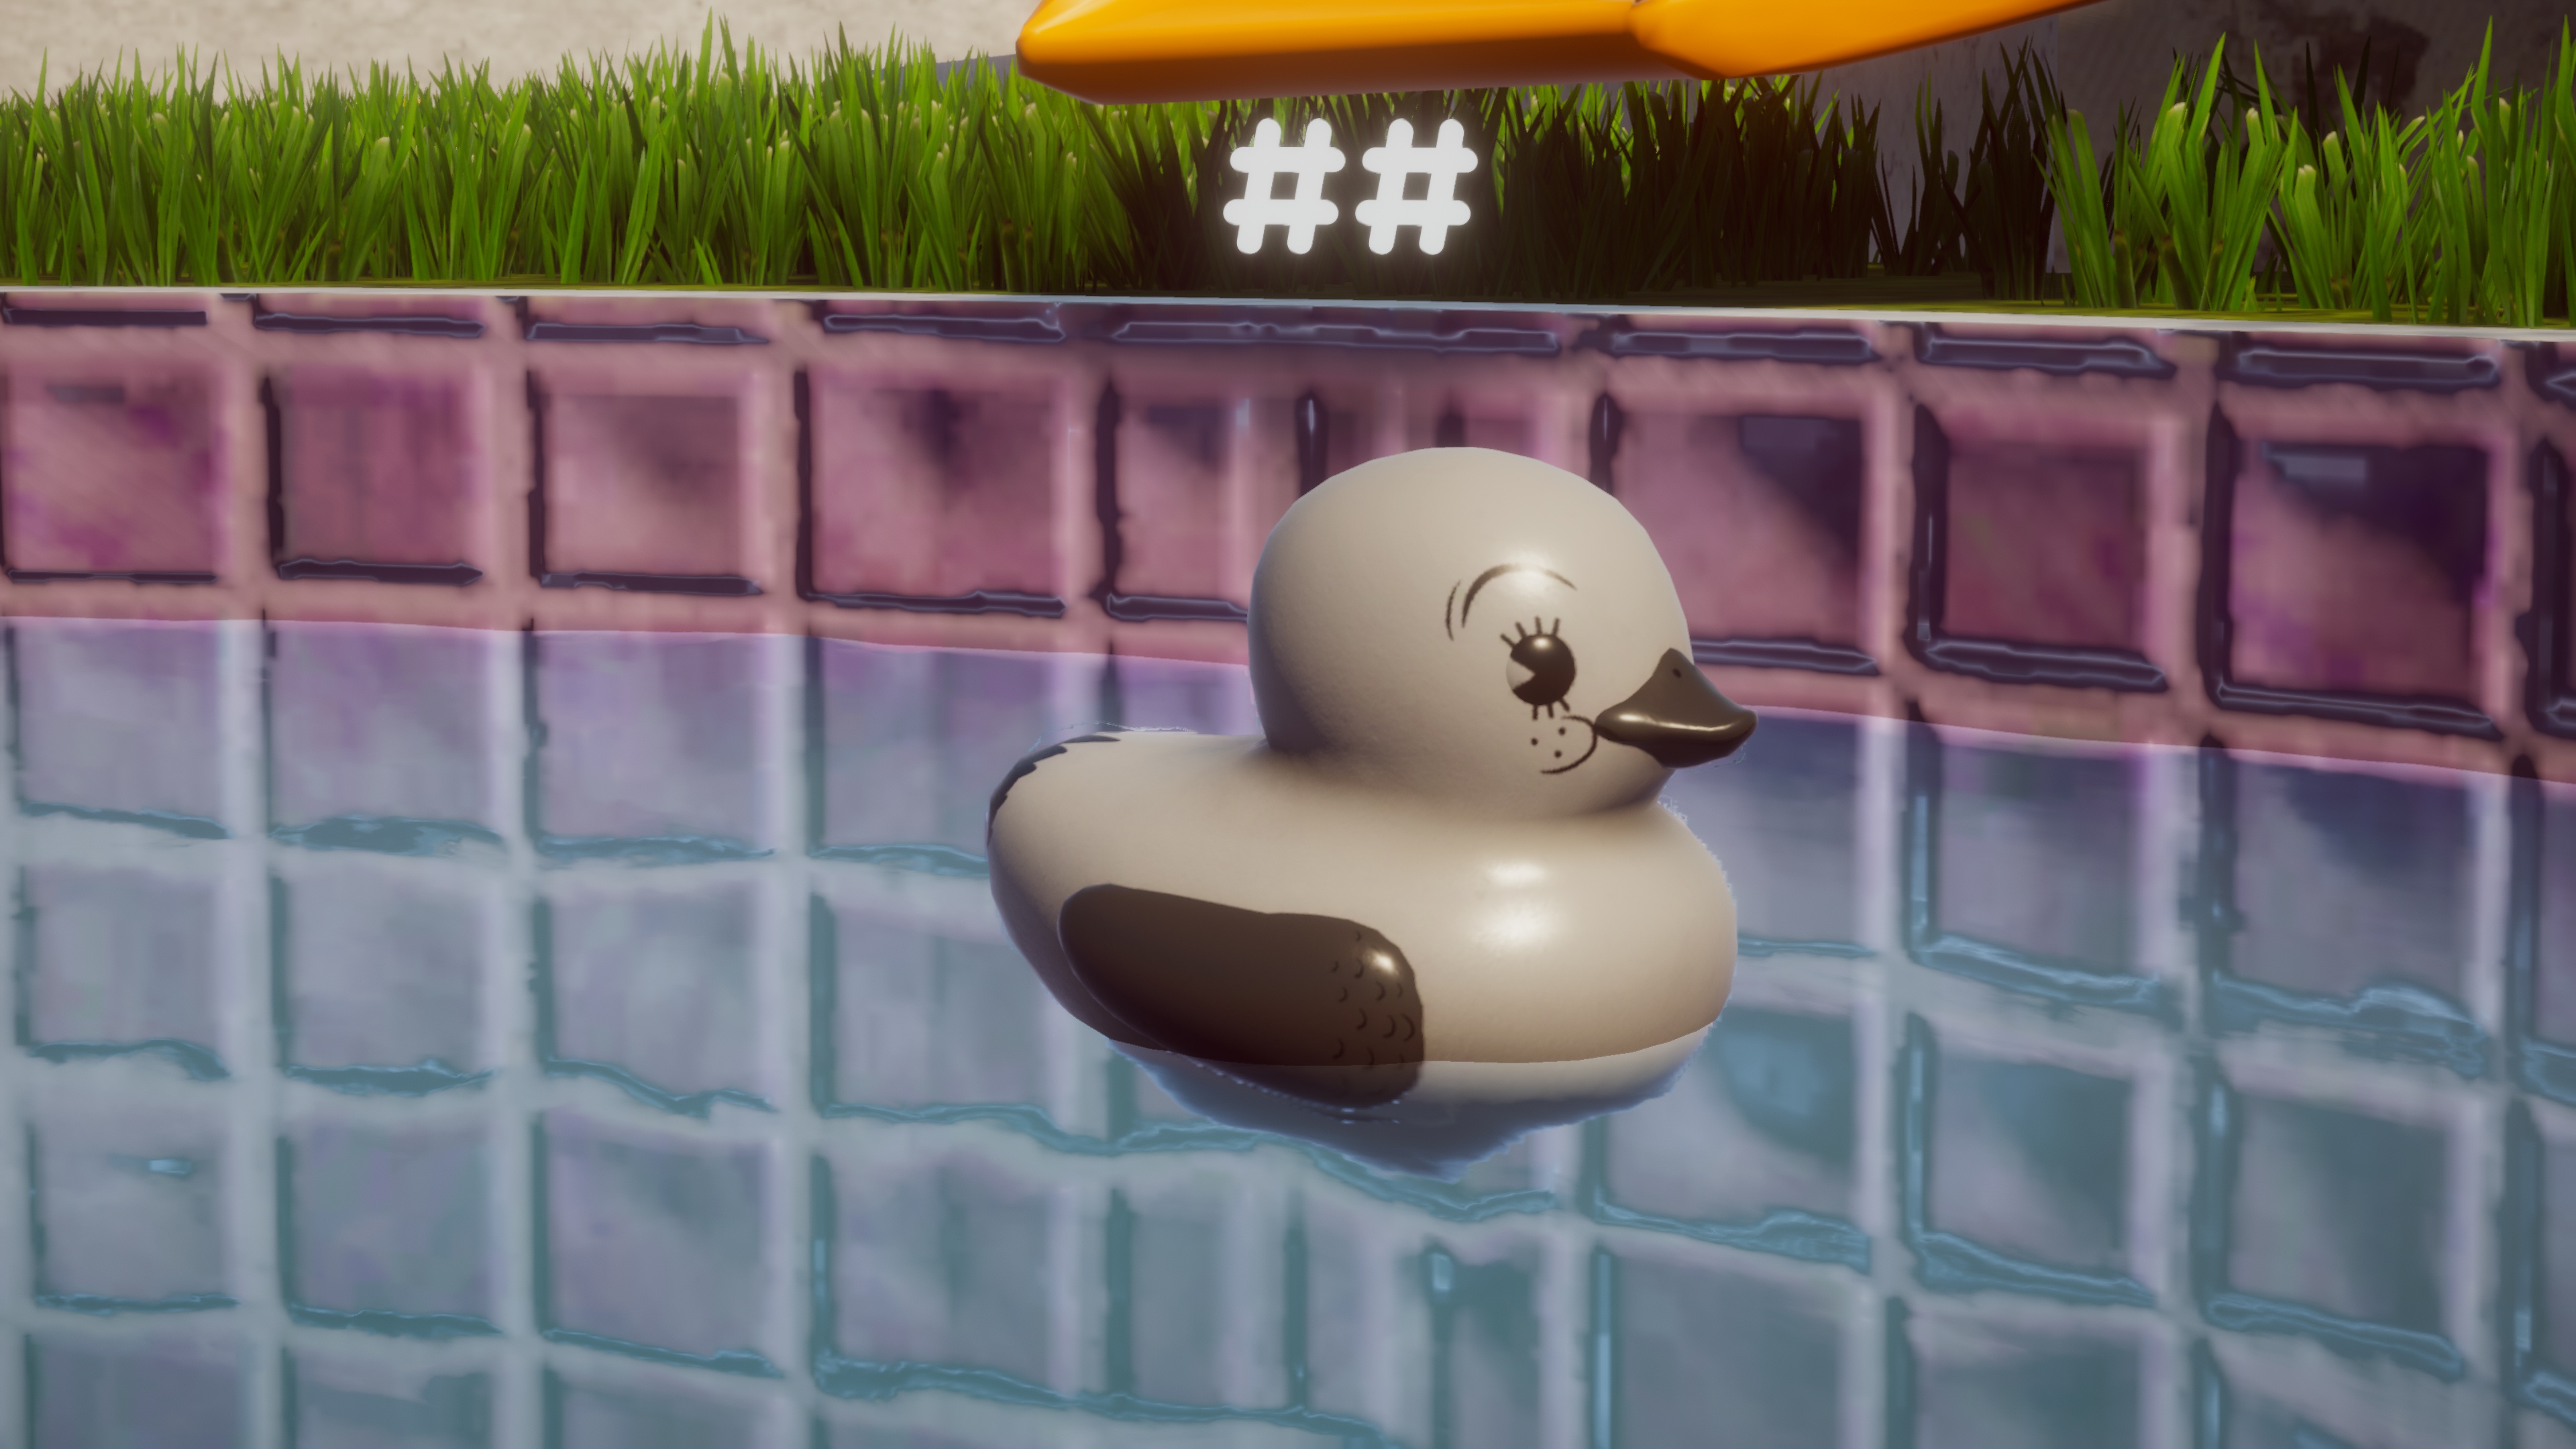 Black and white duck with a code